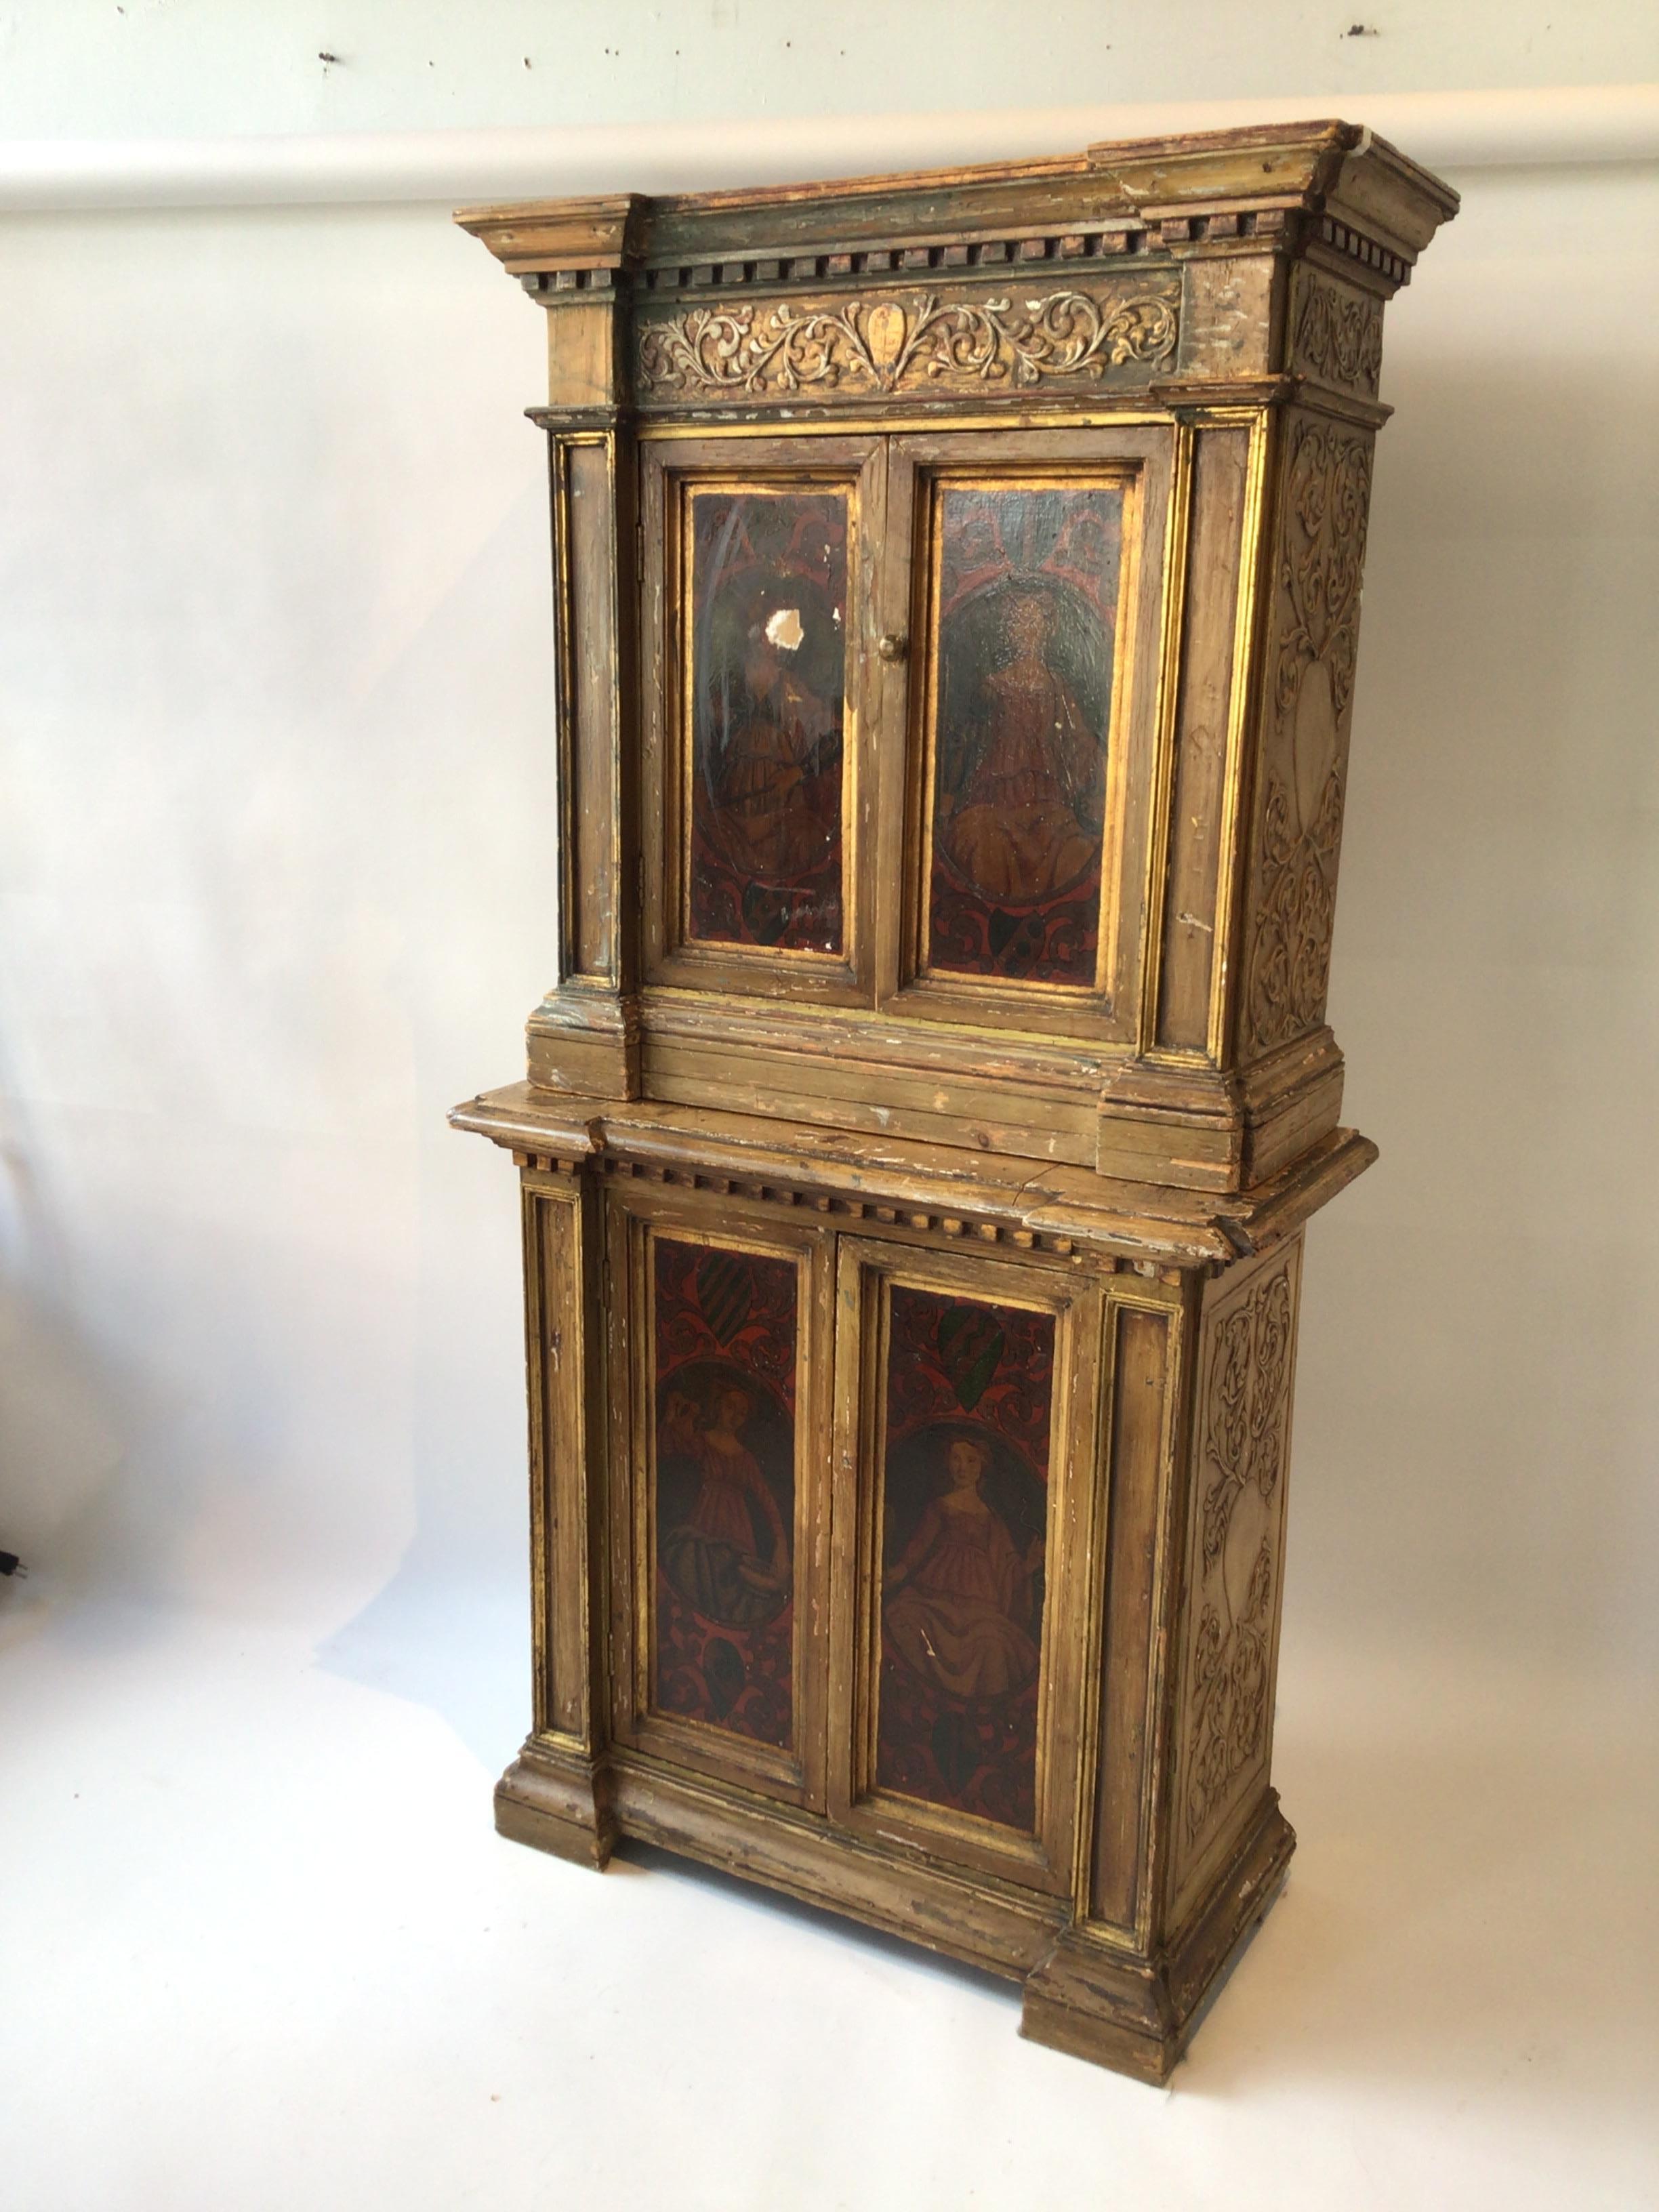 1870s Italian Renaissance style 4 door cupboard. Hand painted scenes on each door. Purchased from the Natale Busoni Gallery in Florence.